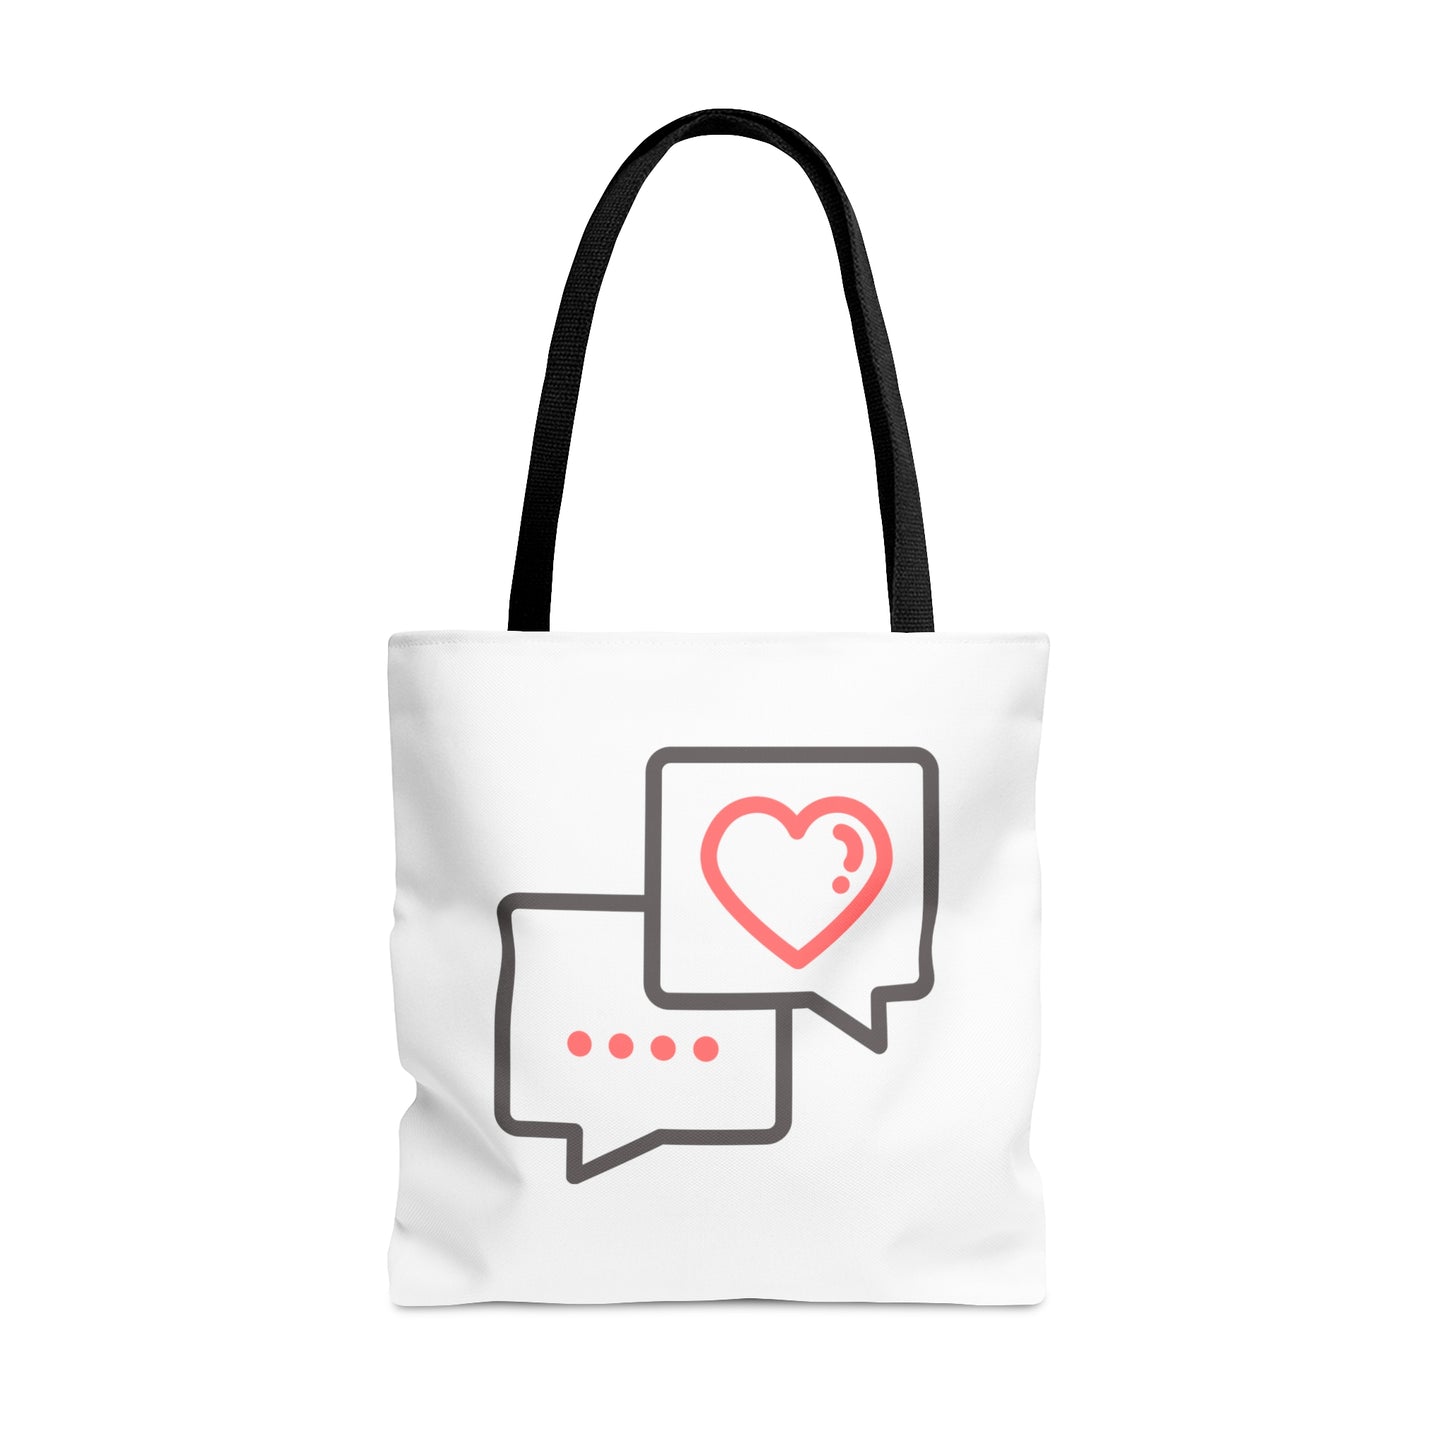 Messege from Heart Printed Tote Bag, Valentine's Tote Bag